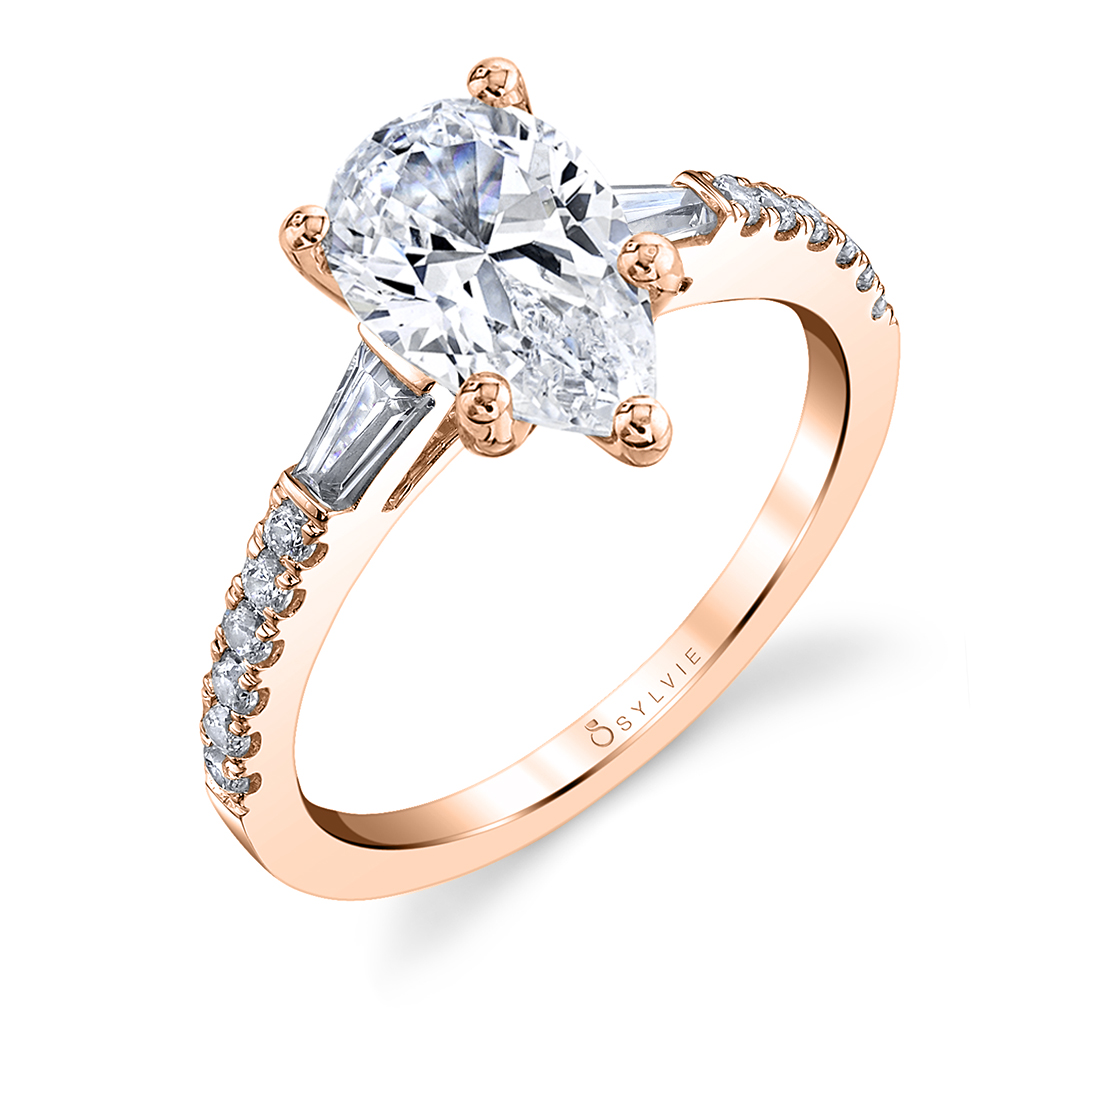 Pear Shaped Engagement Ring with Baguettes shown in rose gold